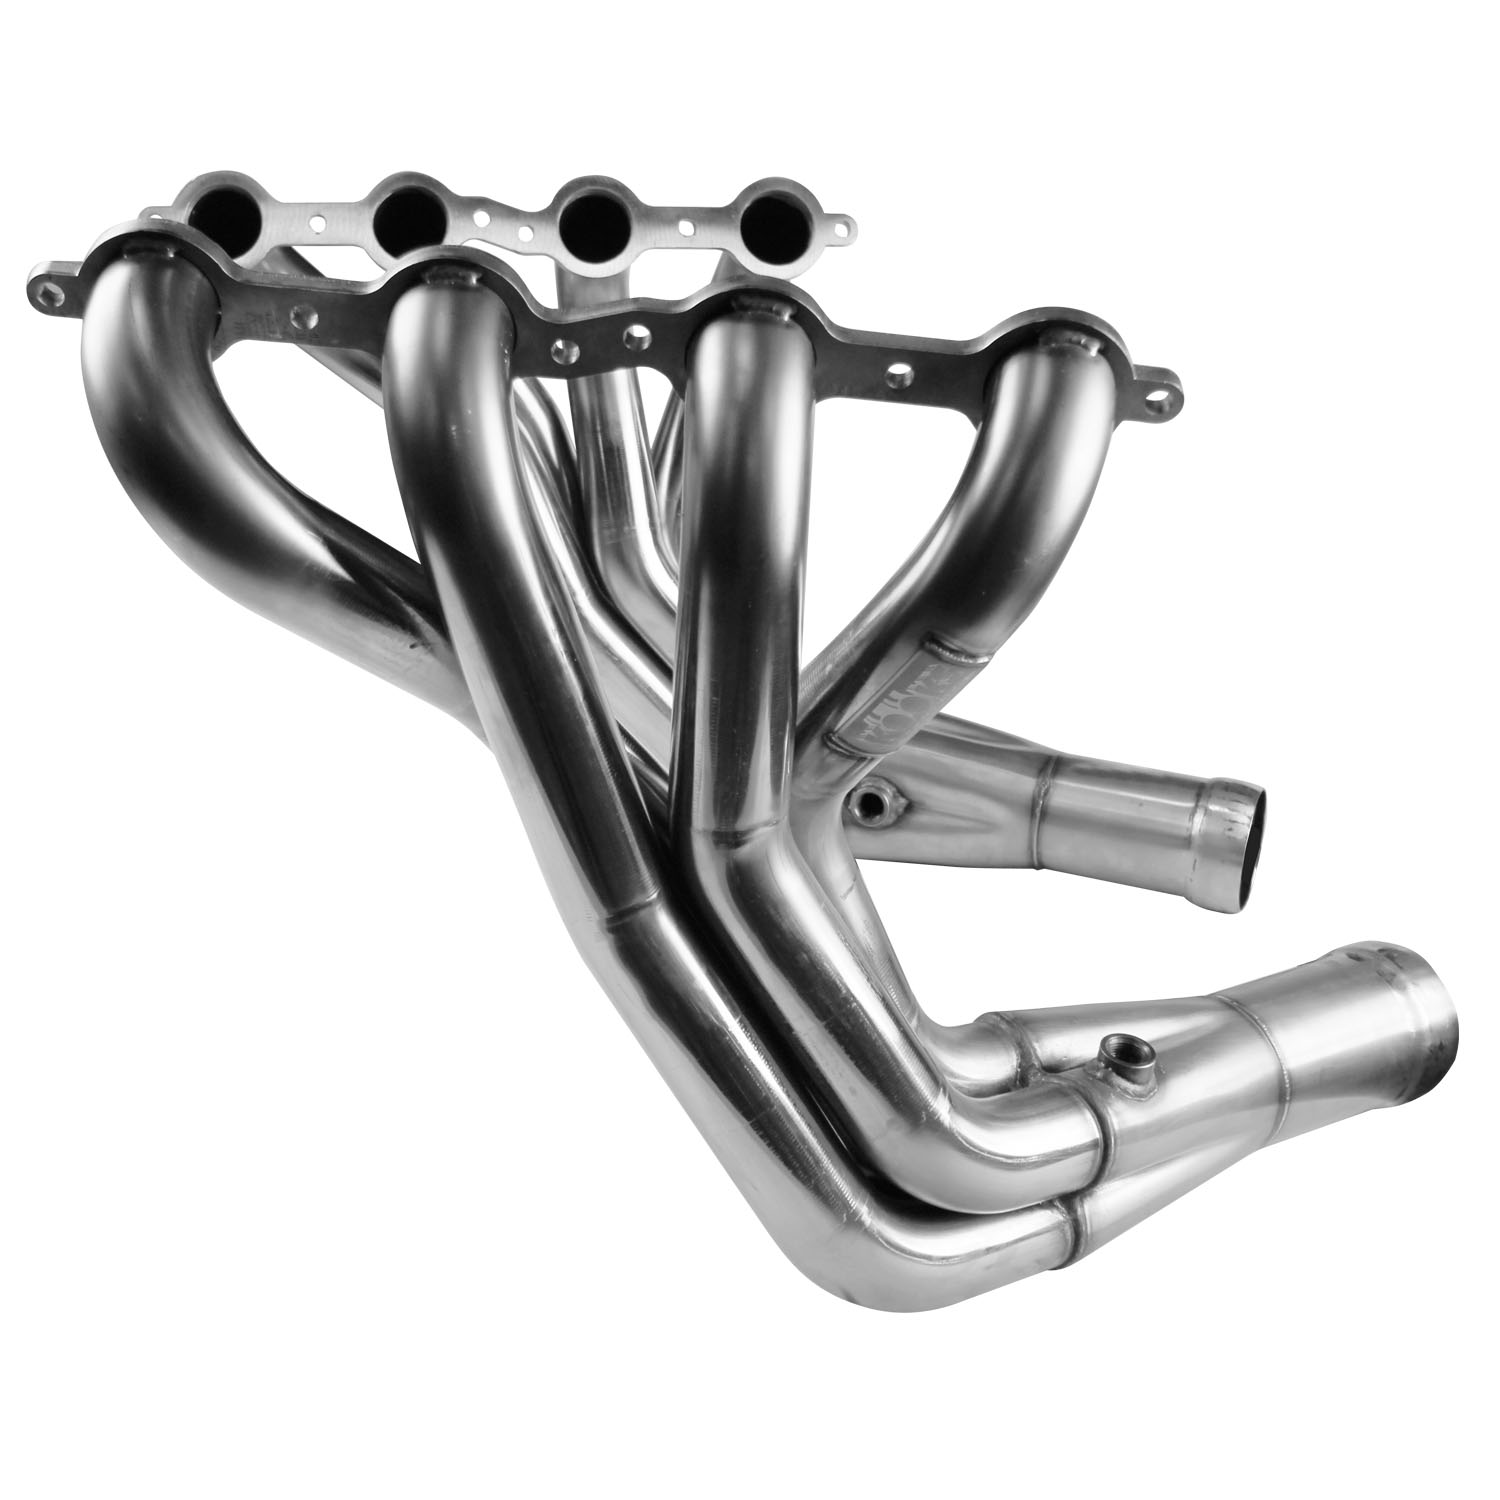 Stainless Steel Headers Race Version-Non Emission 1.875 x 3" Long Tube 97-04 Corvette C5 LS1/LS6 5.7L O2 Fittings Only w/Merge C